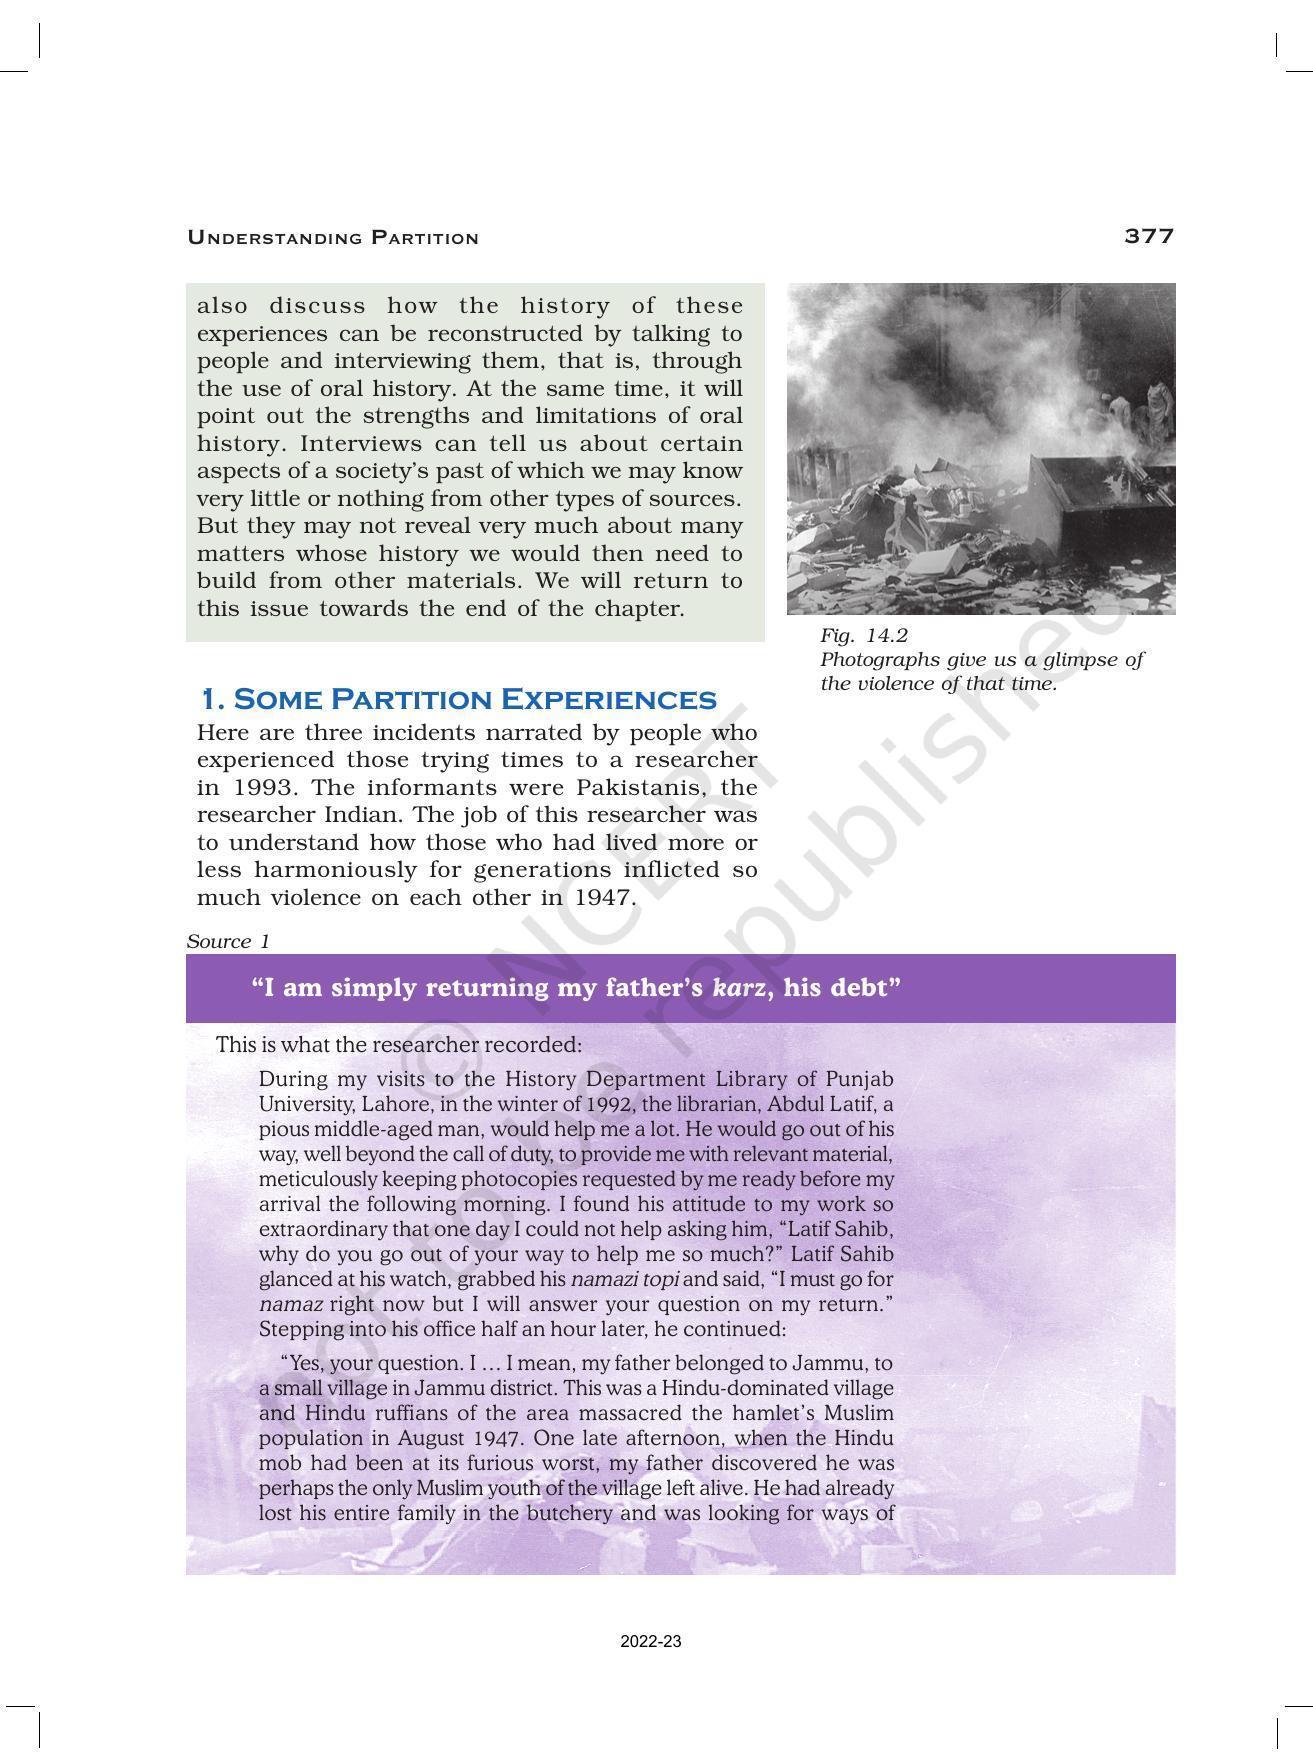 NCERT Book for Class 12 History (Part-III) Chapter 14 Understanding Partition - Page 2